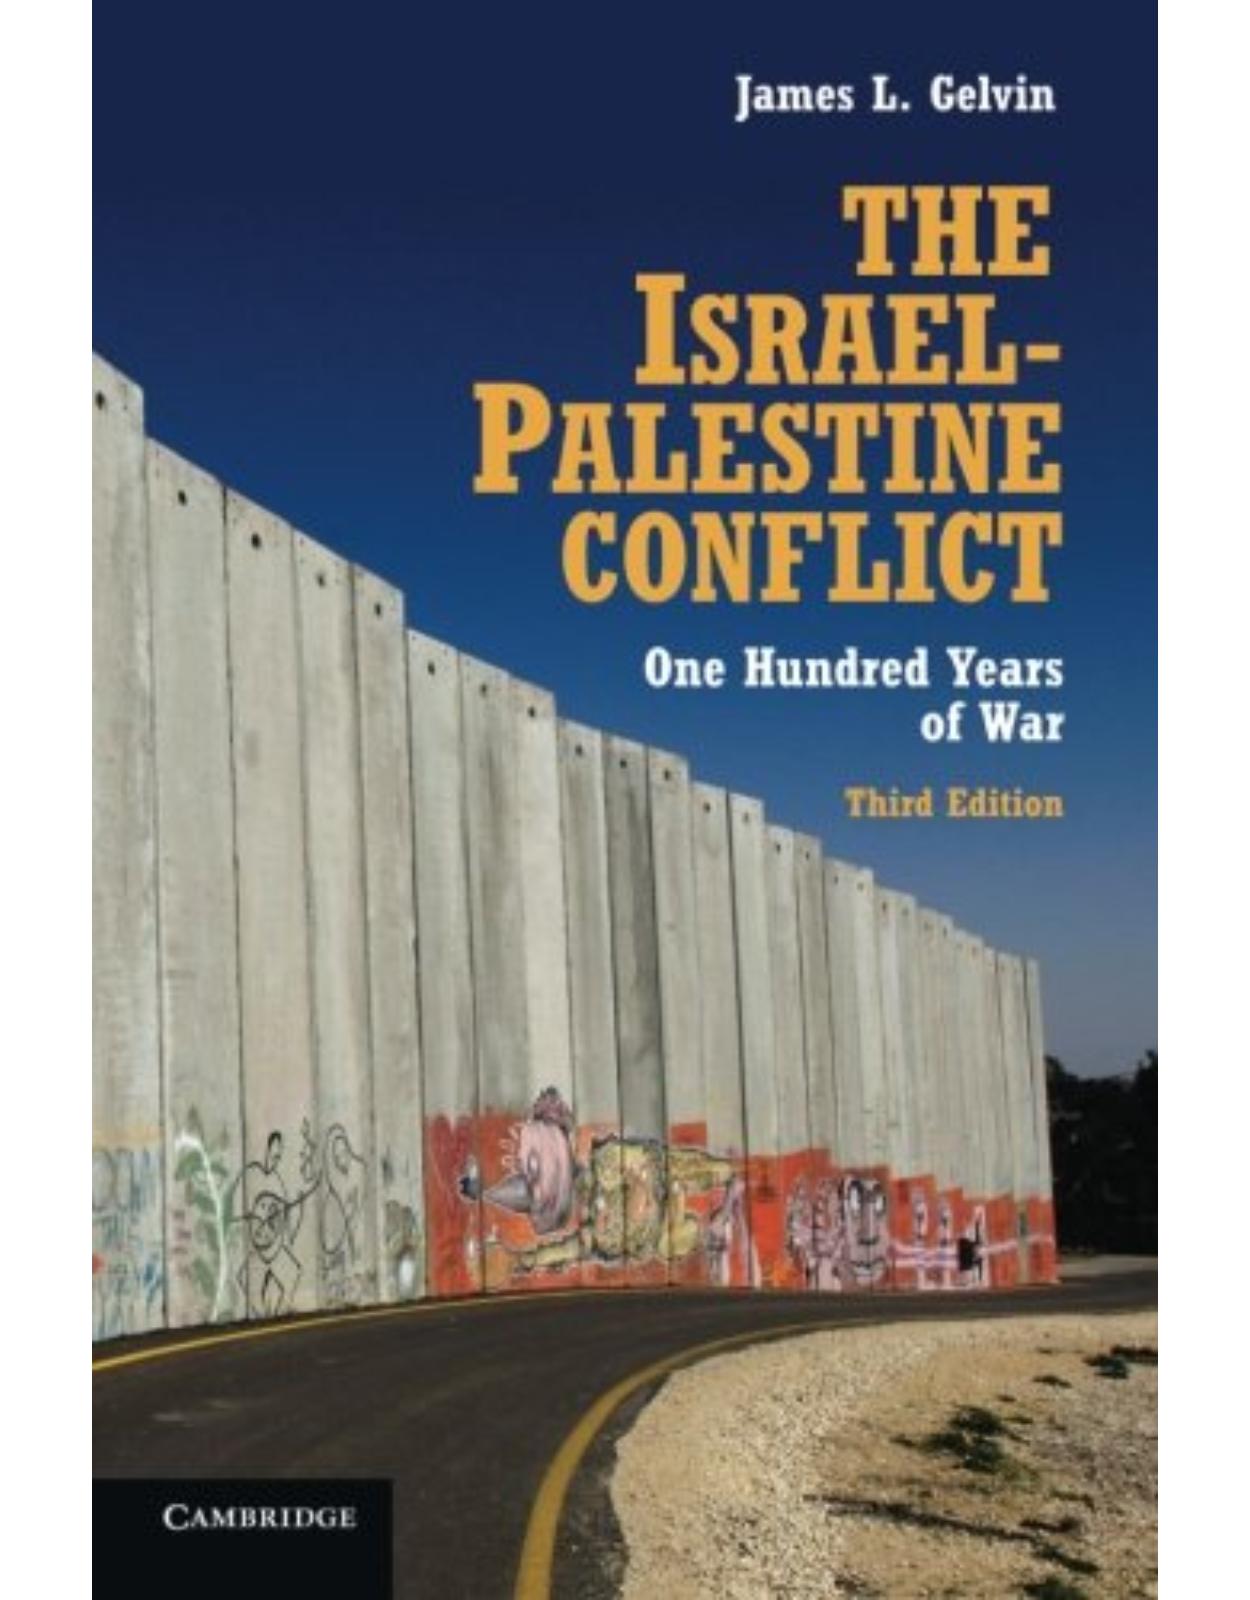 The Israel-Palestine Conflict: One Hundred Years of War